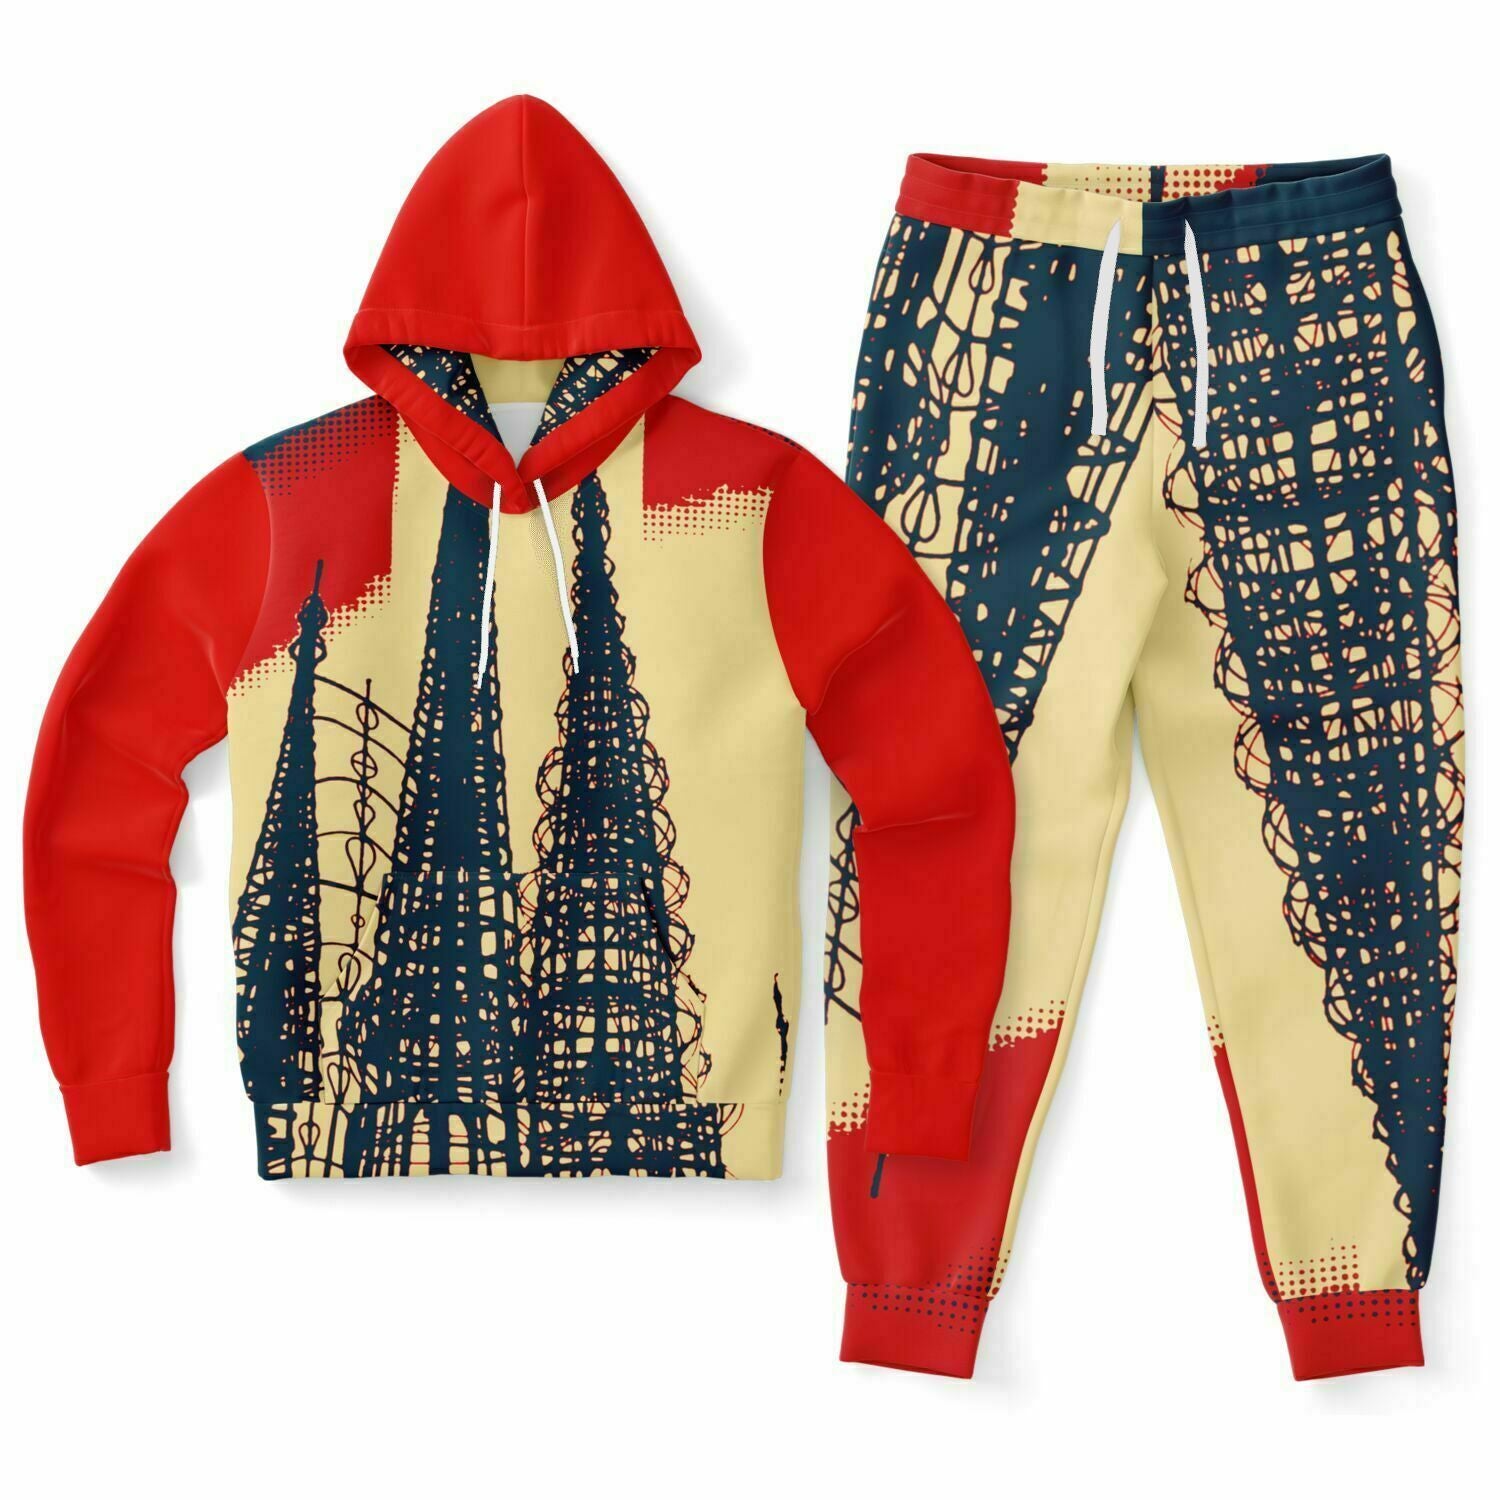 My Hood Compton Hoodie and Jogger Set | Streetwear | Track Suit | Fashion Jogger Set